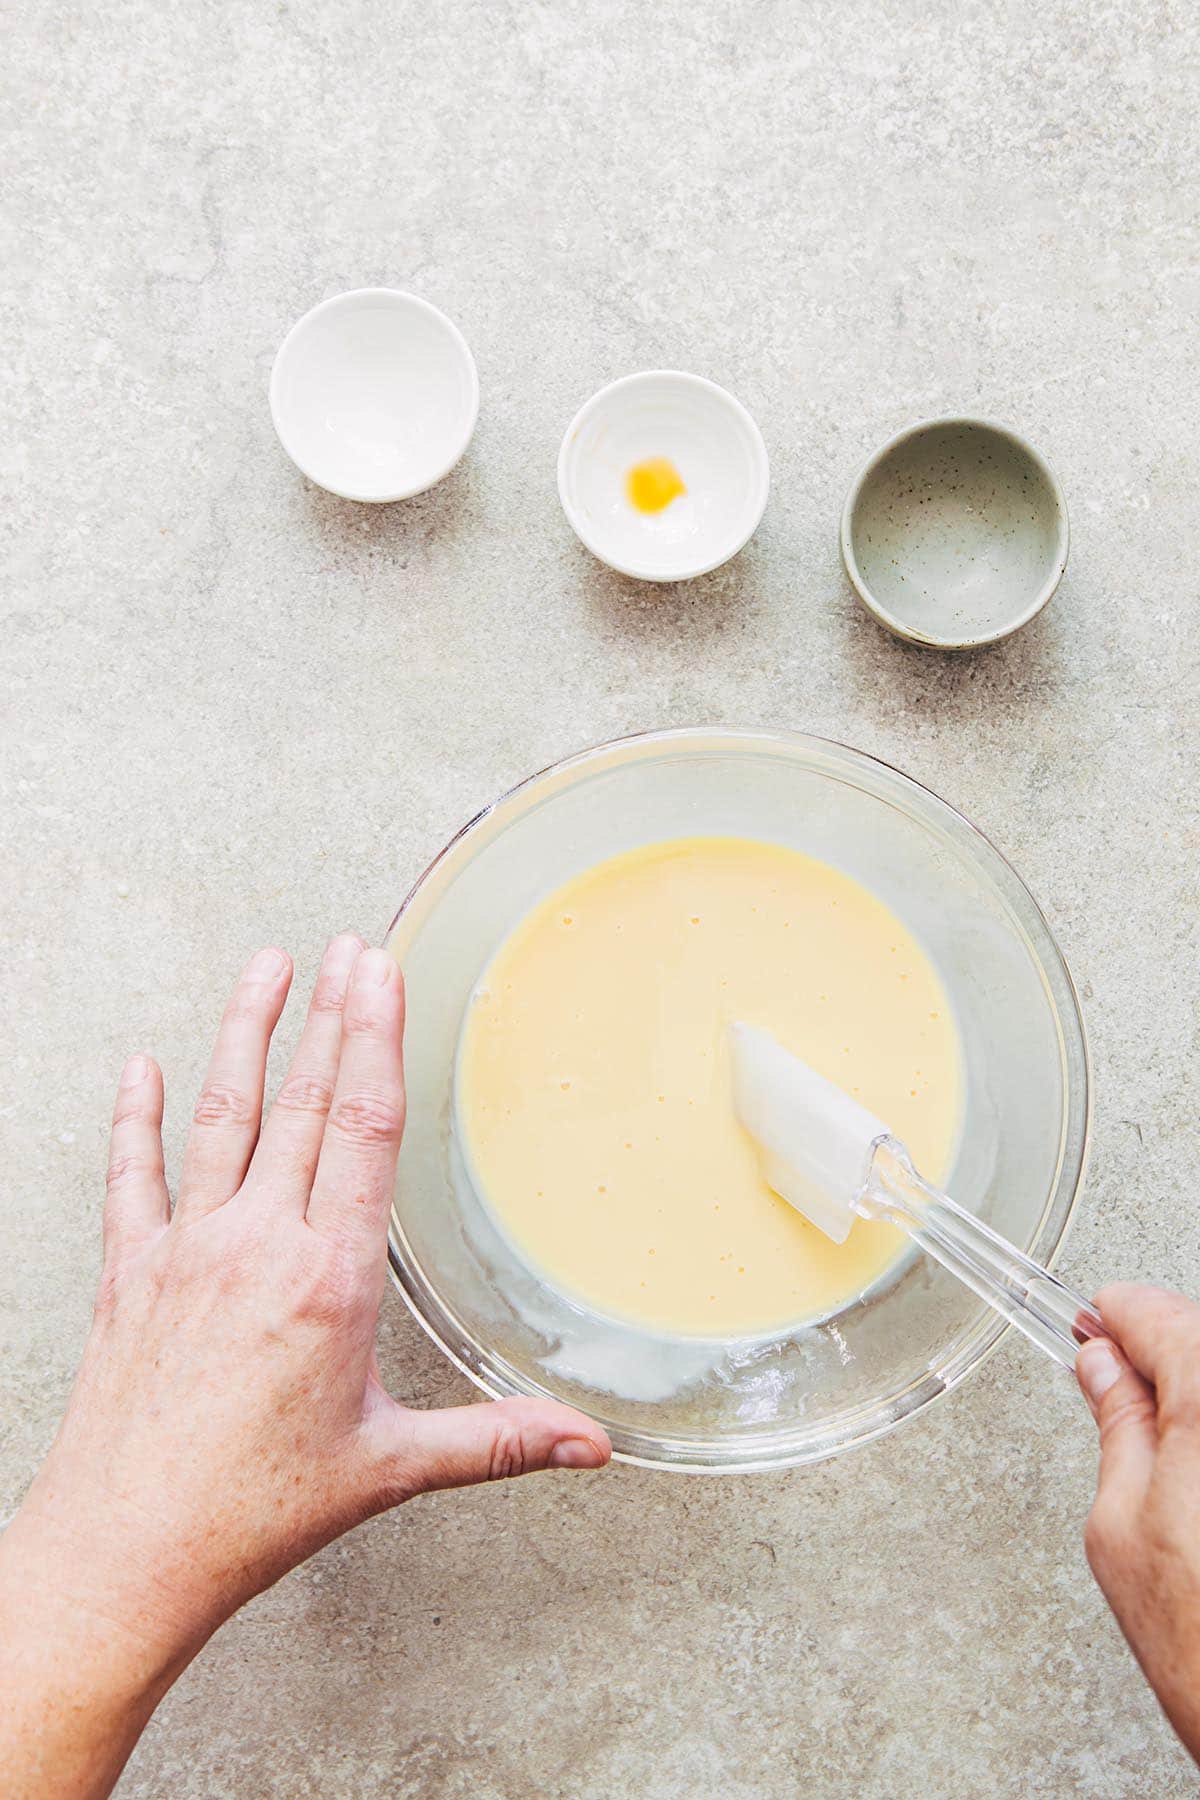 A hand stirring condensed milk in a glass bowl.